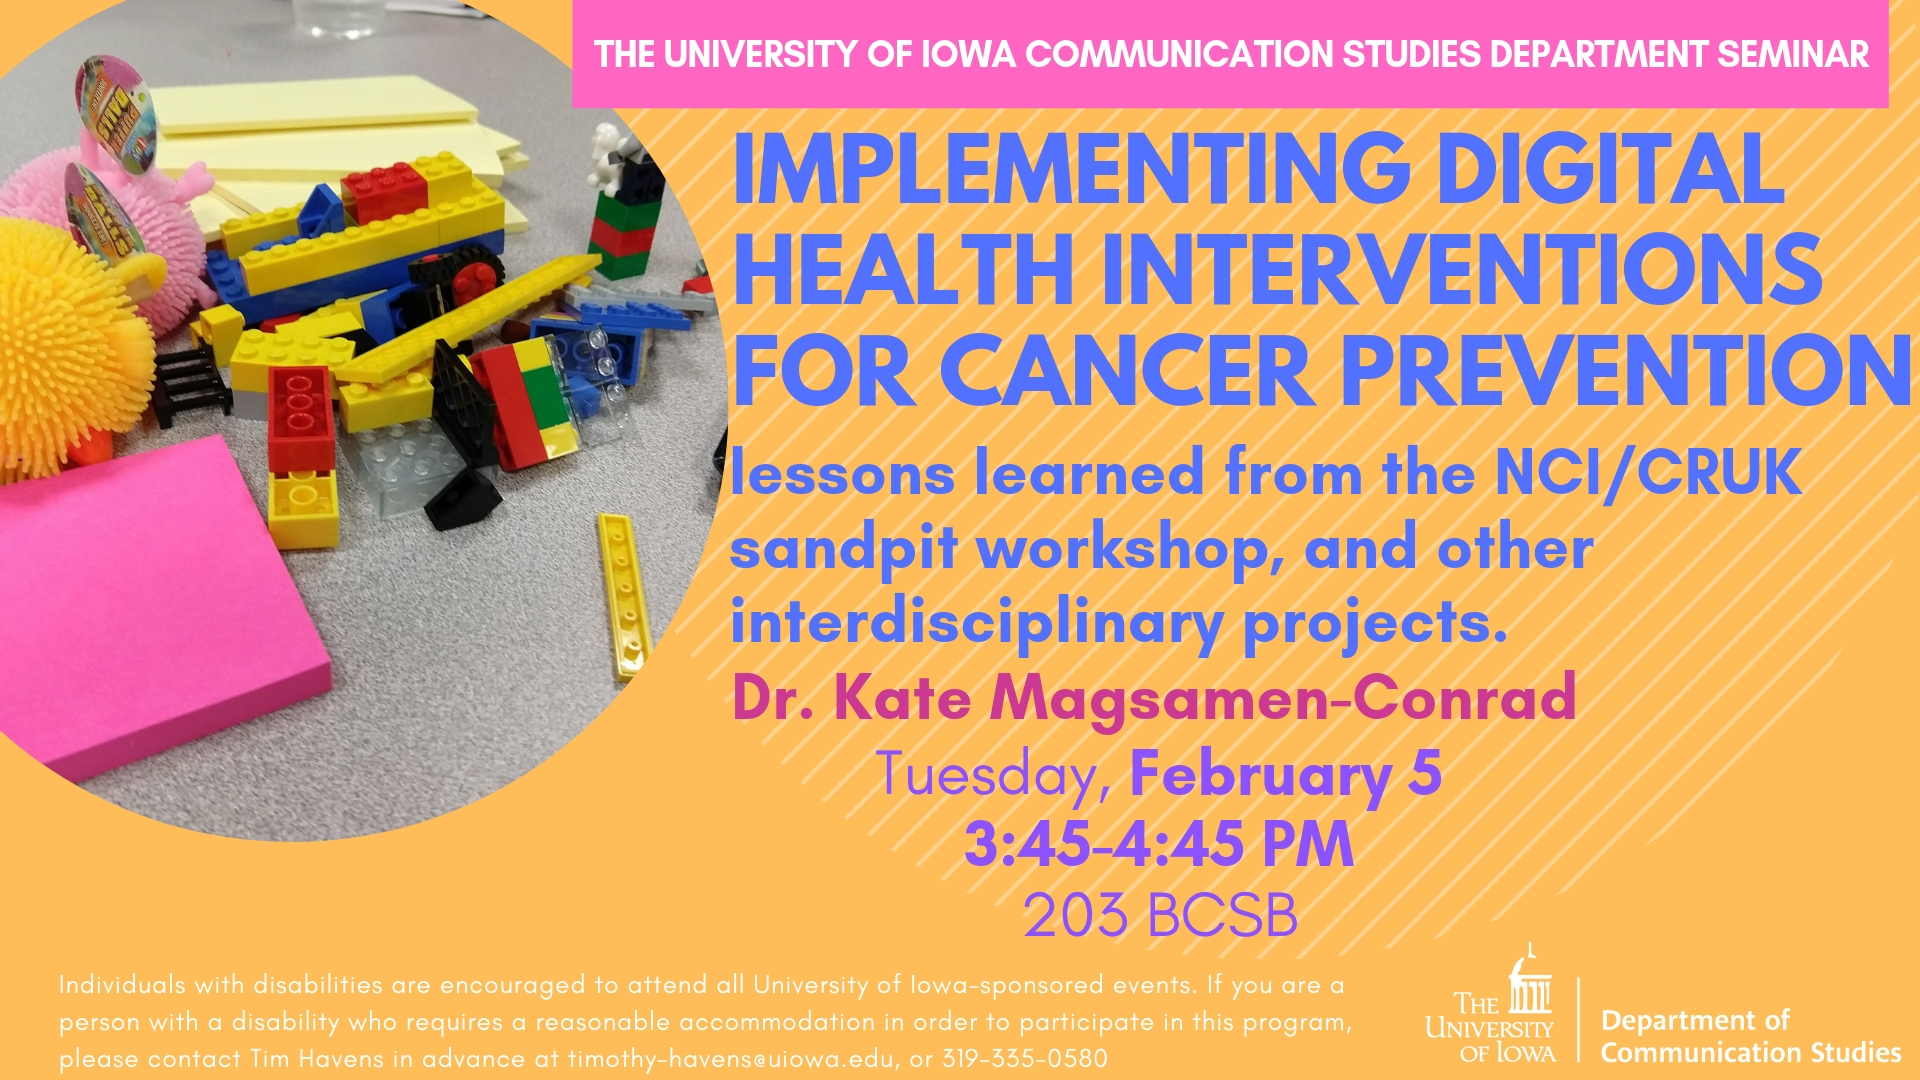 Tuesday, February 5  3:45-4:45 PM  203 BCSB, The University of Iowa Communication Studies Department Seminar: IMPLEMENTING DIGITAL HEALTH  INTERVENTIONS FOR CANCER  PREVENTION - lessons learned from the NCI/CRUK sandpit workshop, and other interdisciplinary projects. - Dr. Kate Magsamen-Conrad